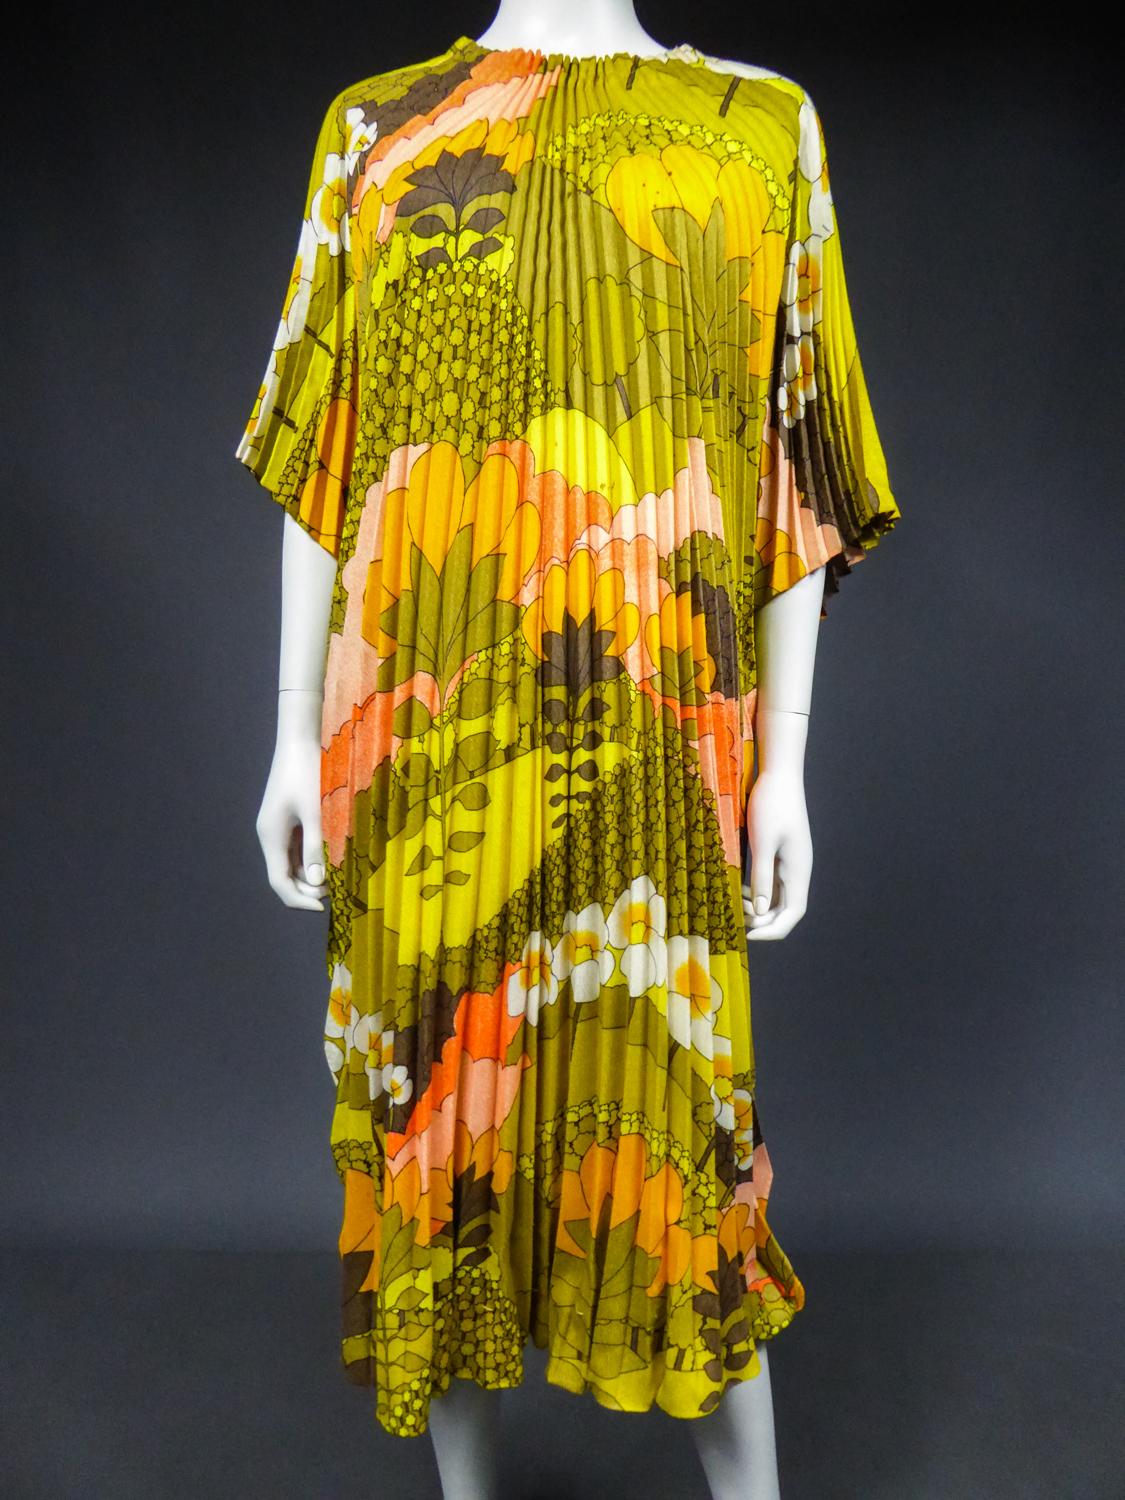 Circa 1970
France

Psychedelic beach dress or tunic in printed polyester cotton with vegetal motifs (daisies, palm leaves, etc.) in green, khaki, yellow, orange, red and white tones from the 70s by Georgie Keyloun. Kimono tunic with wide opening for